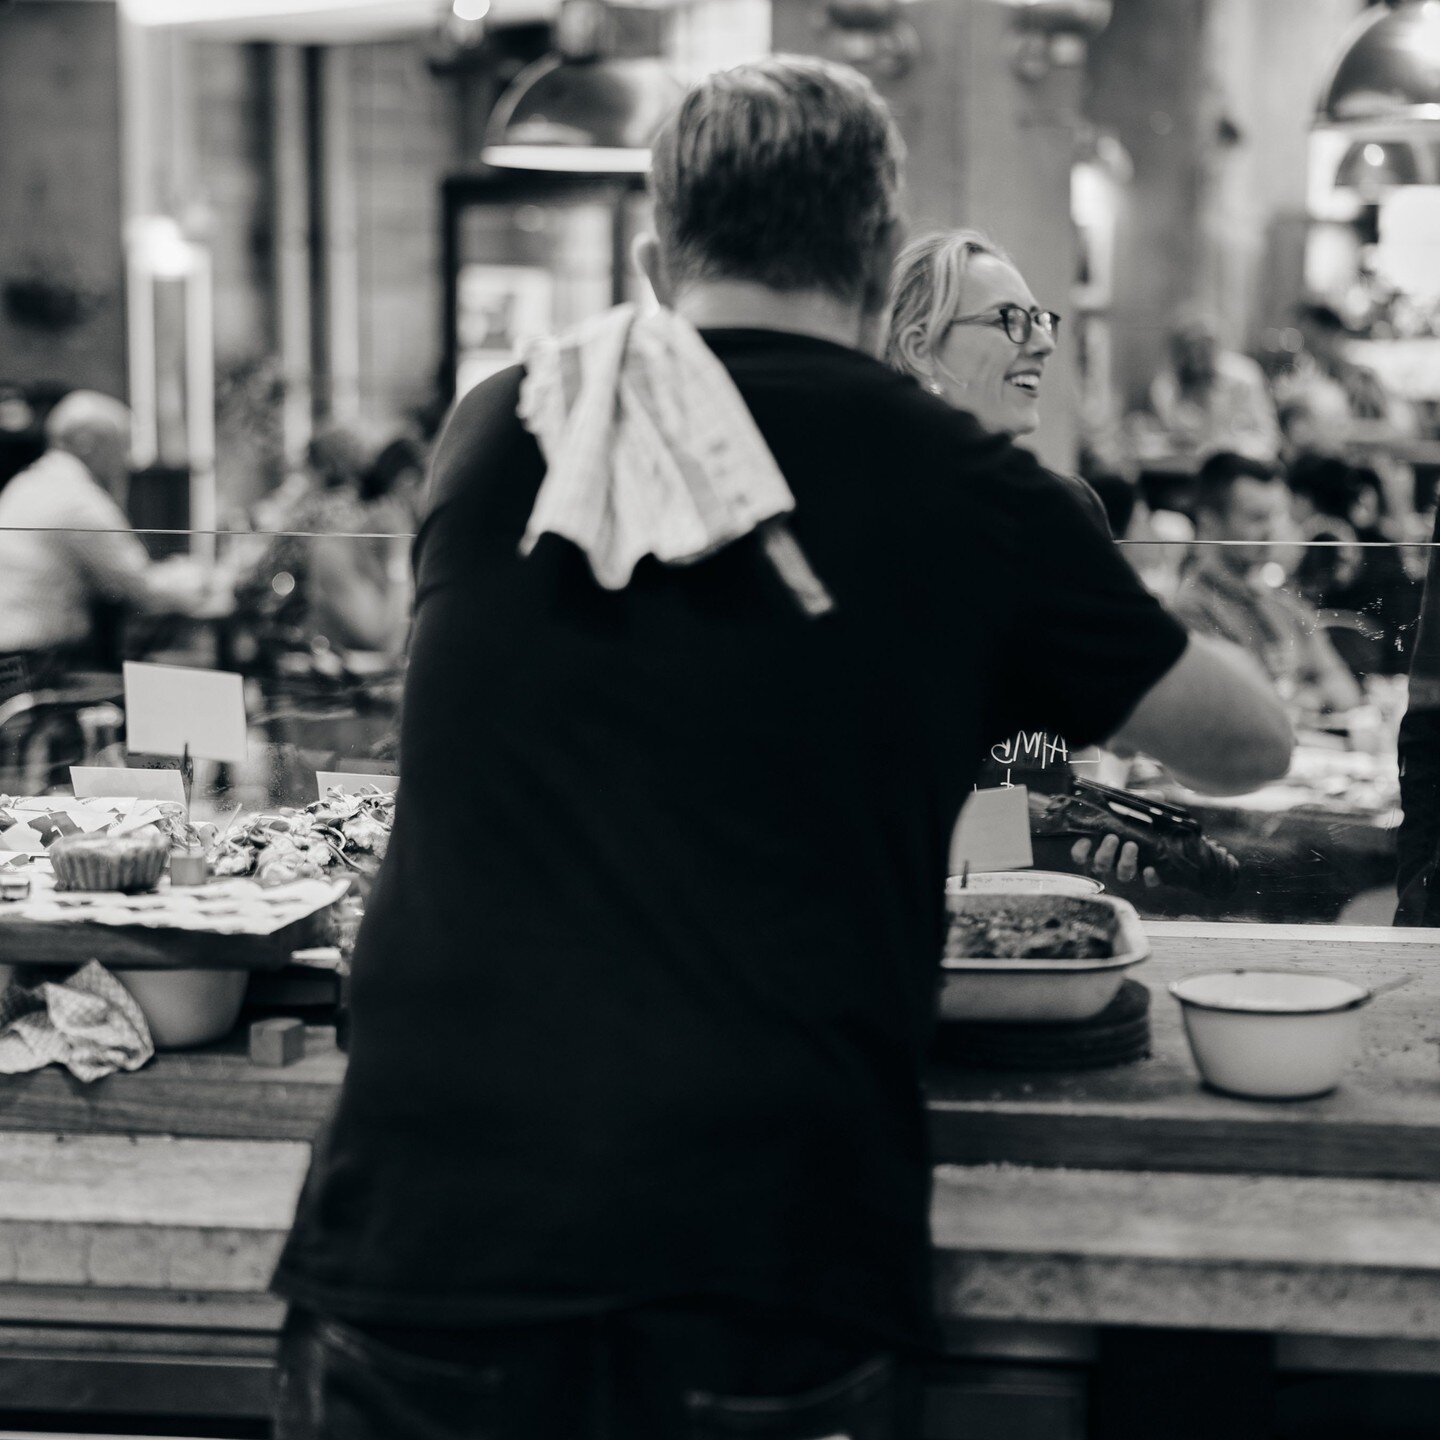 You know Mike's in the house when you spot the tea towel over the shoulder! 

#KitchenbyMike #CulinaryMagic #ChefLife #Chefmode